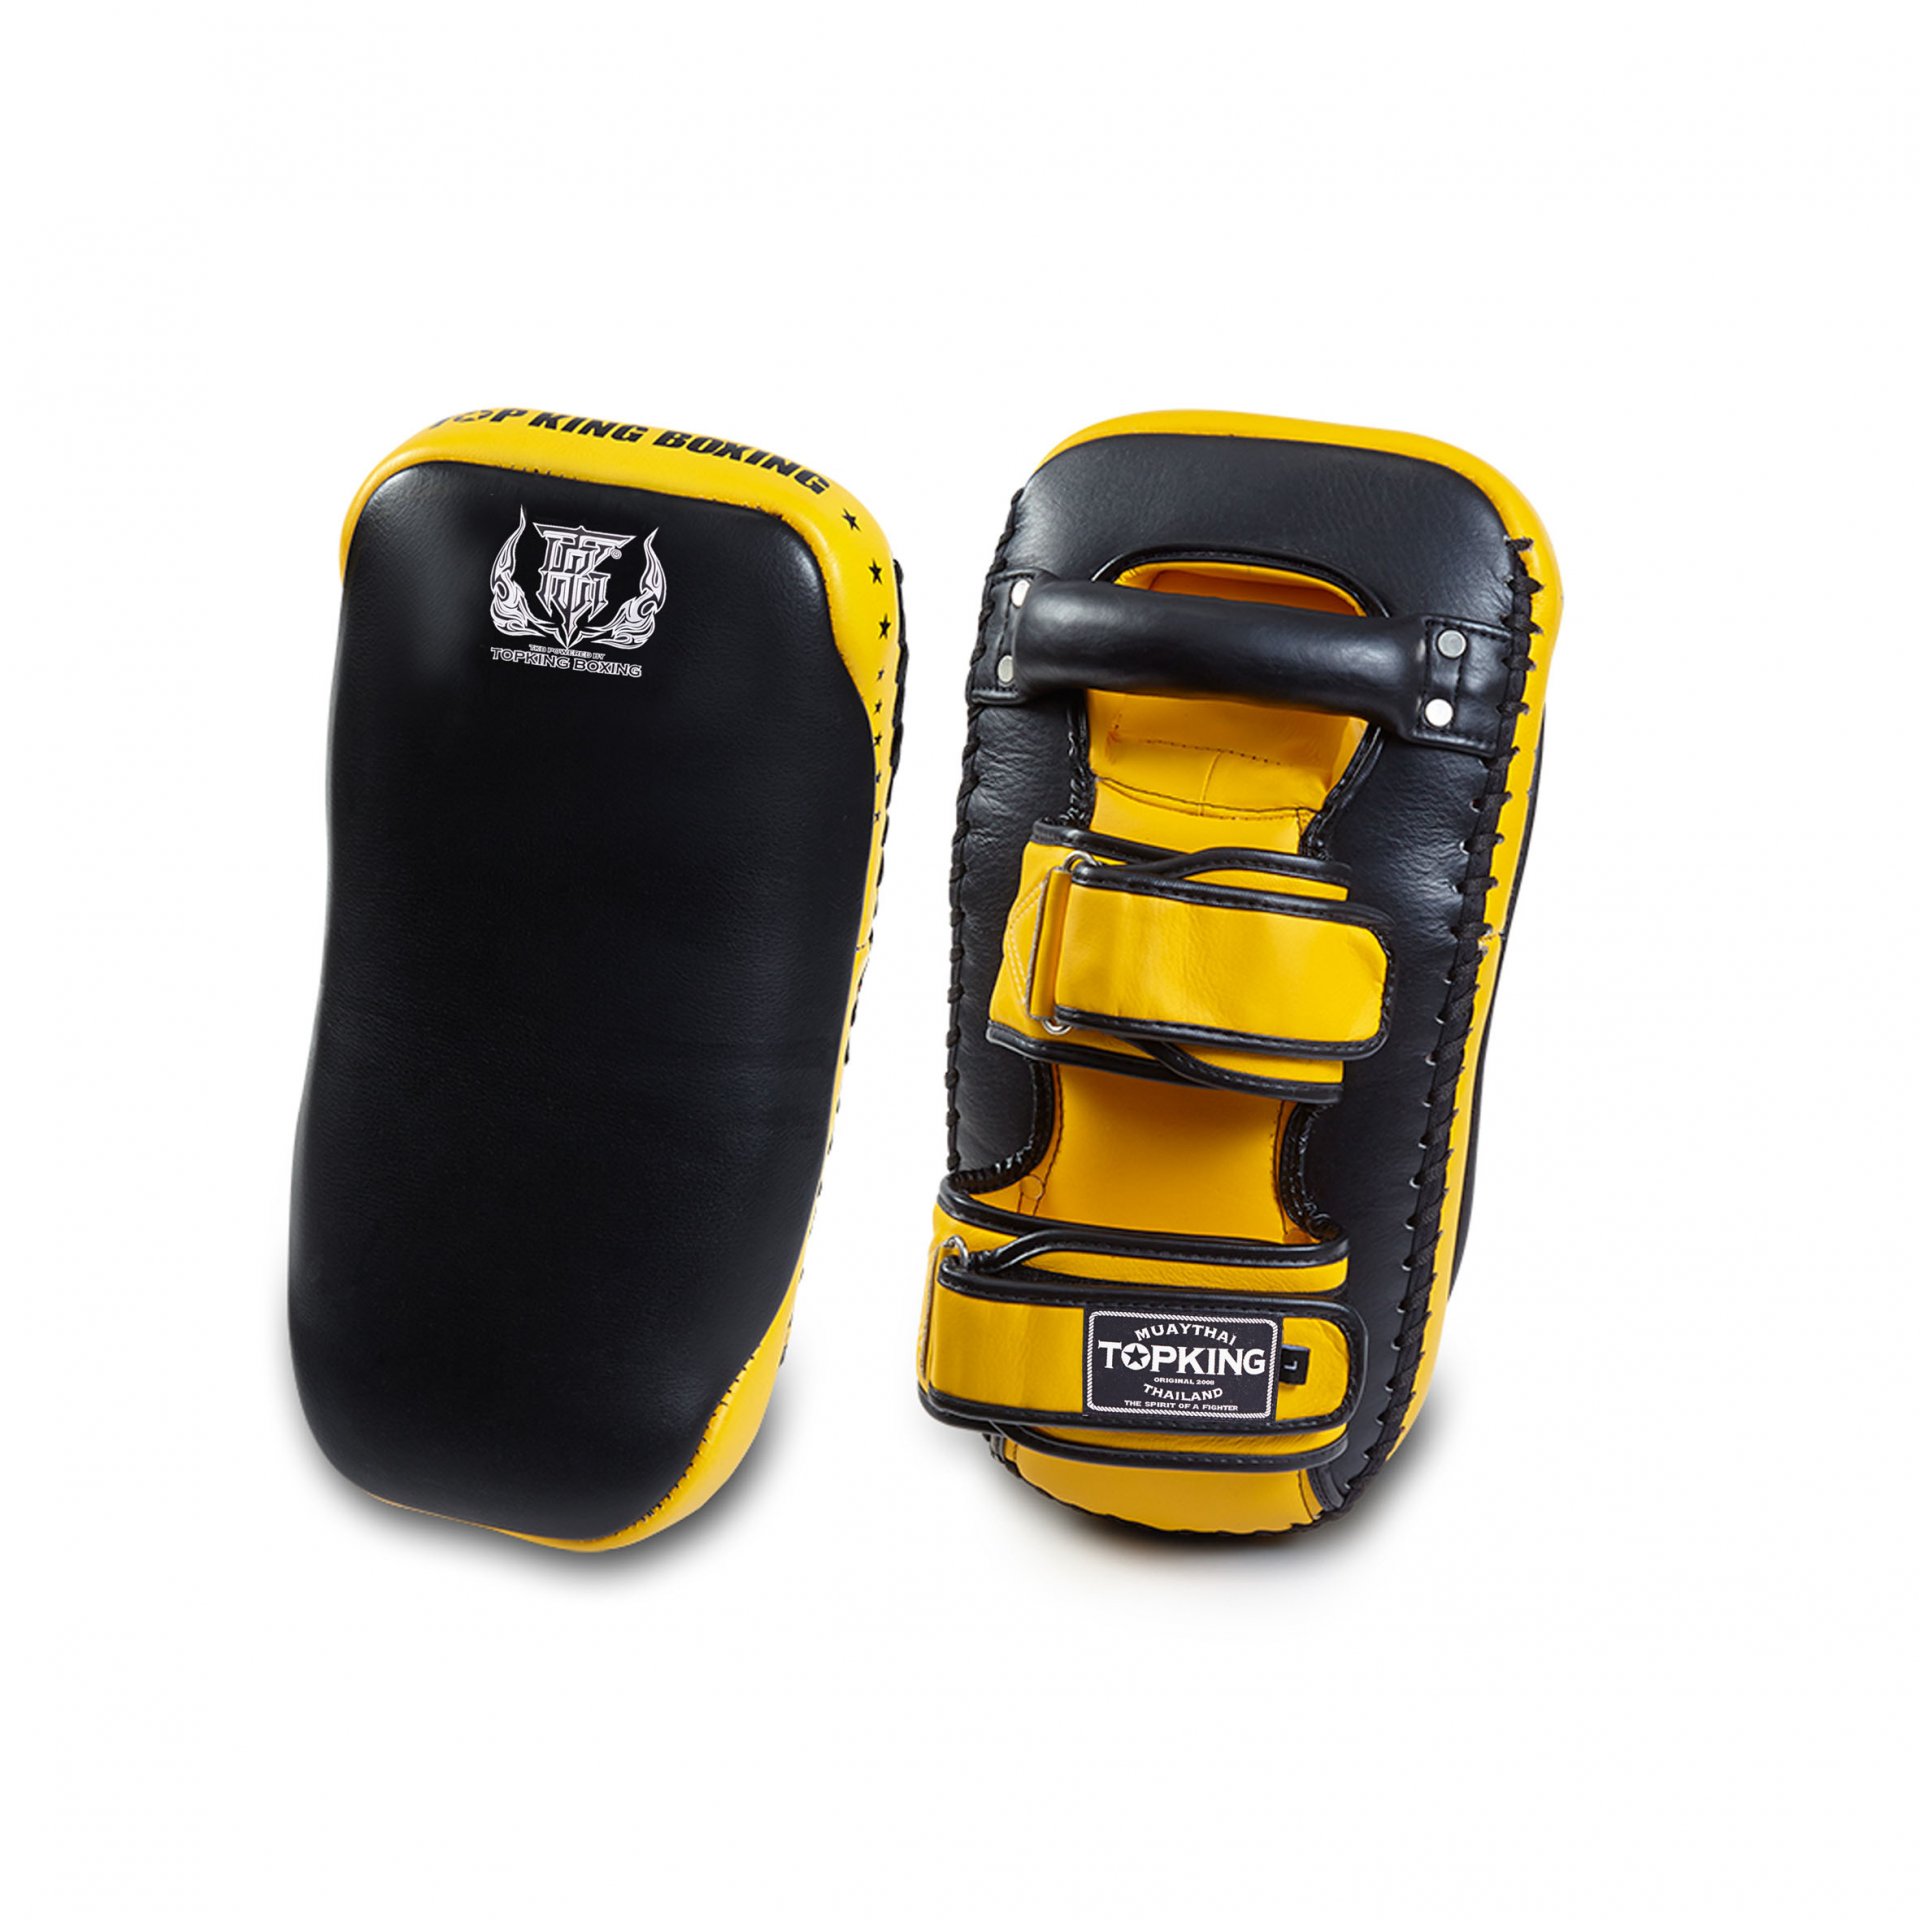 TOPKING KICKING PADS "EXTREME" (CURVE) VELCRO